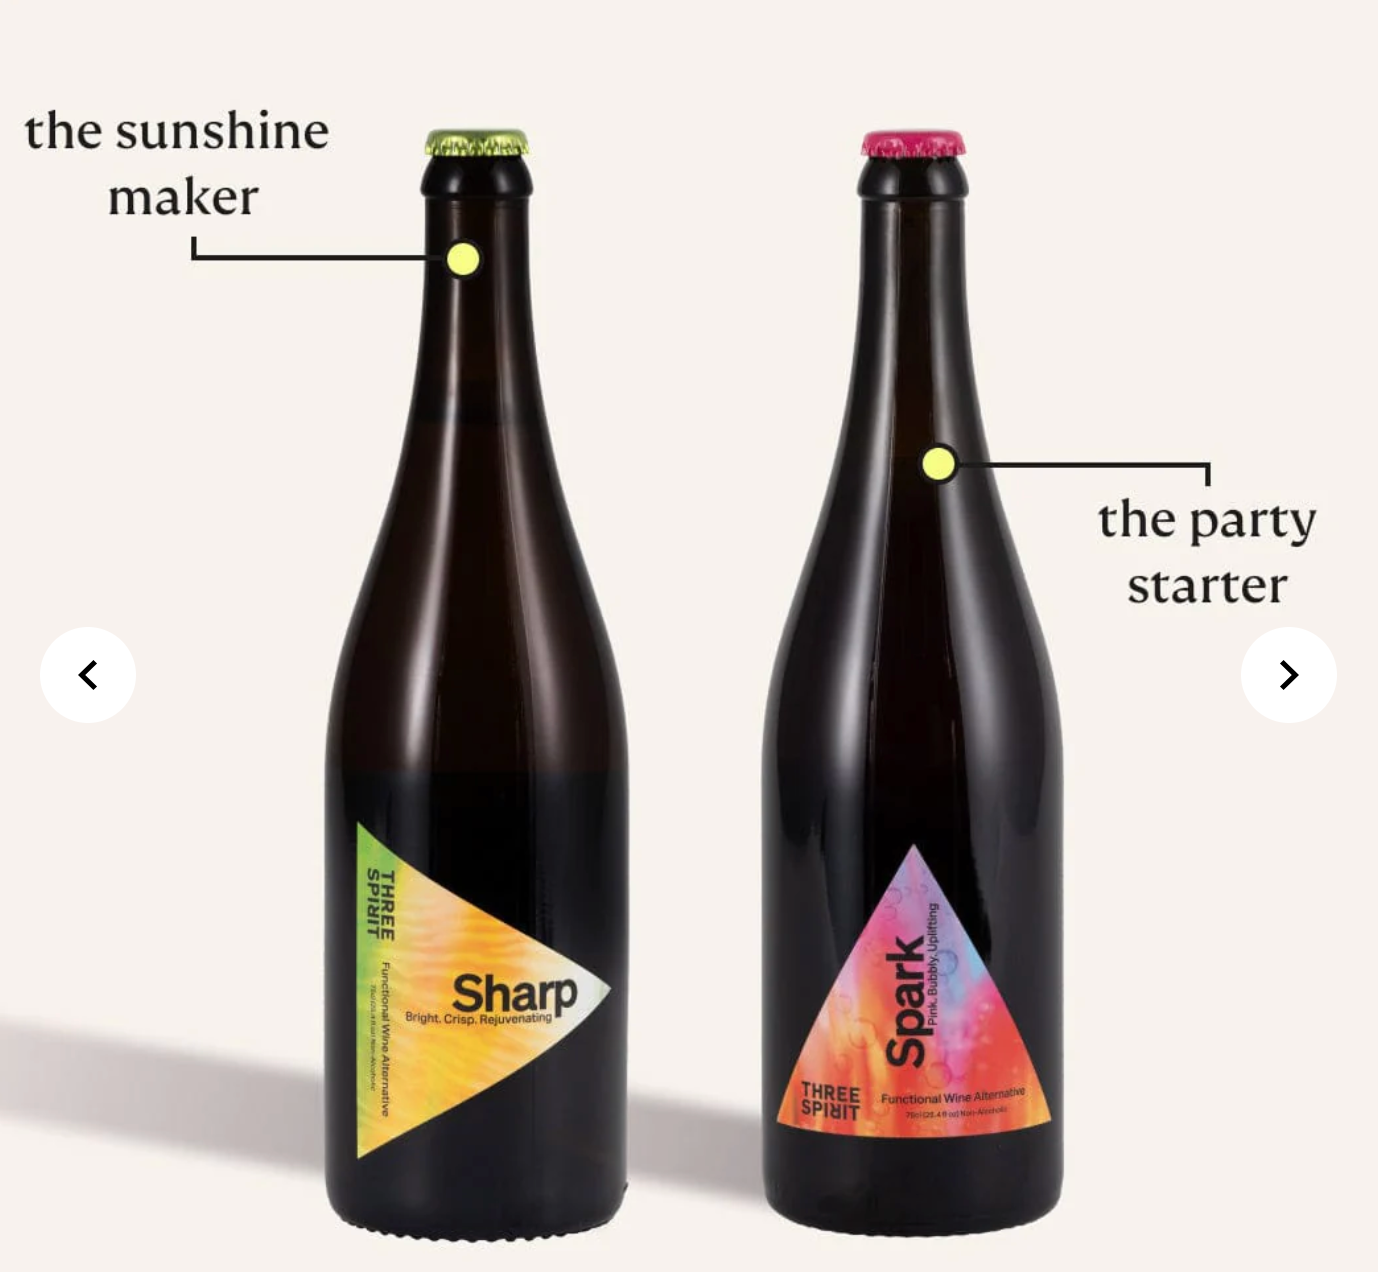 a sharp bottle and a spark bottle next to eachother